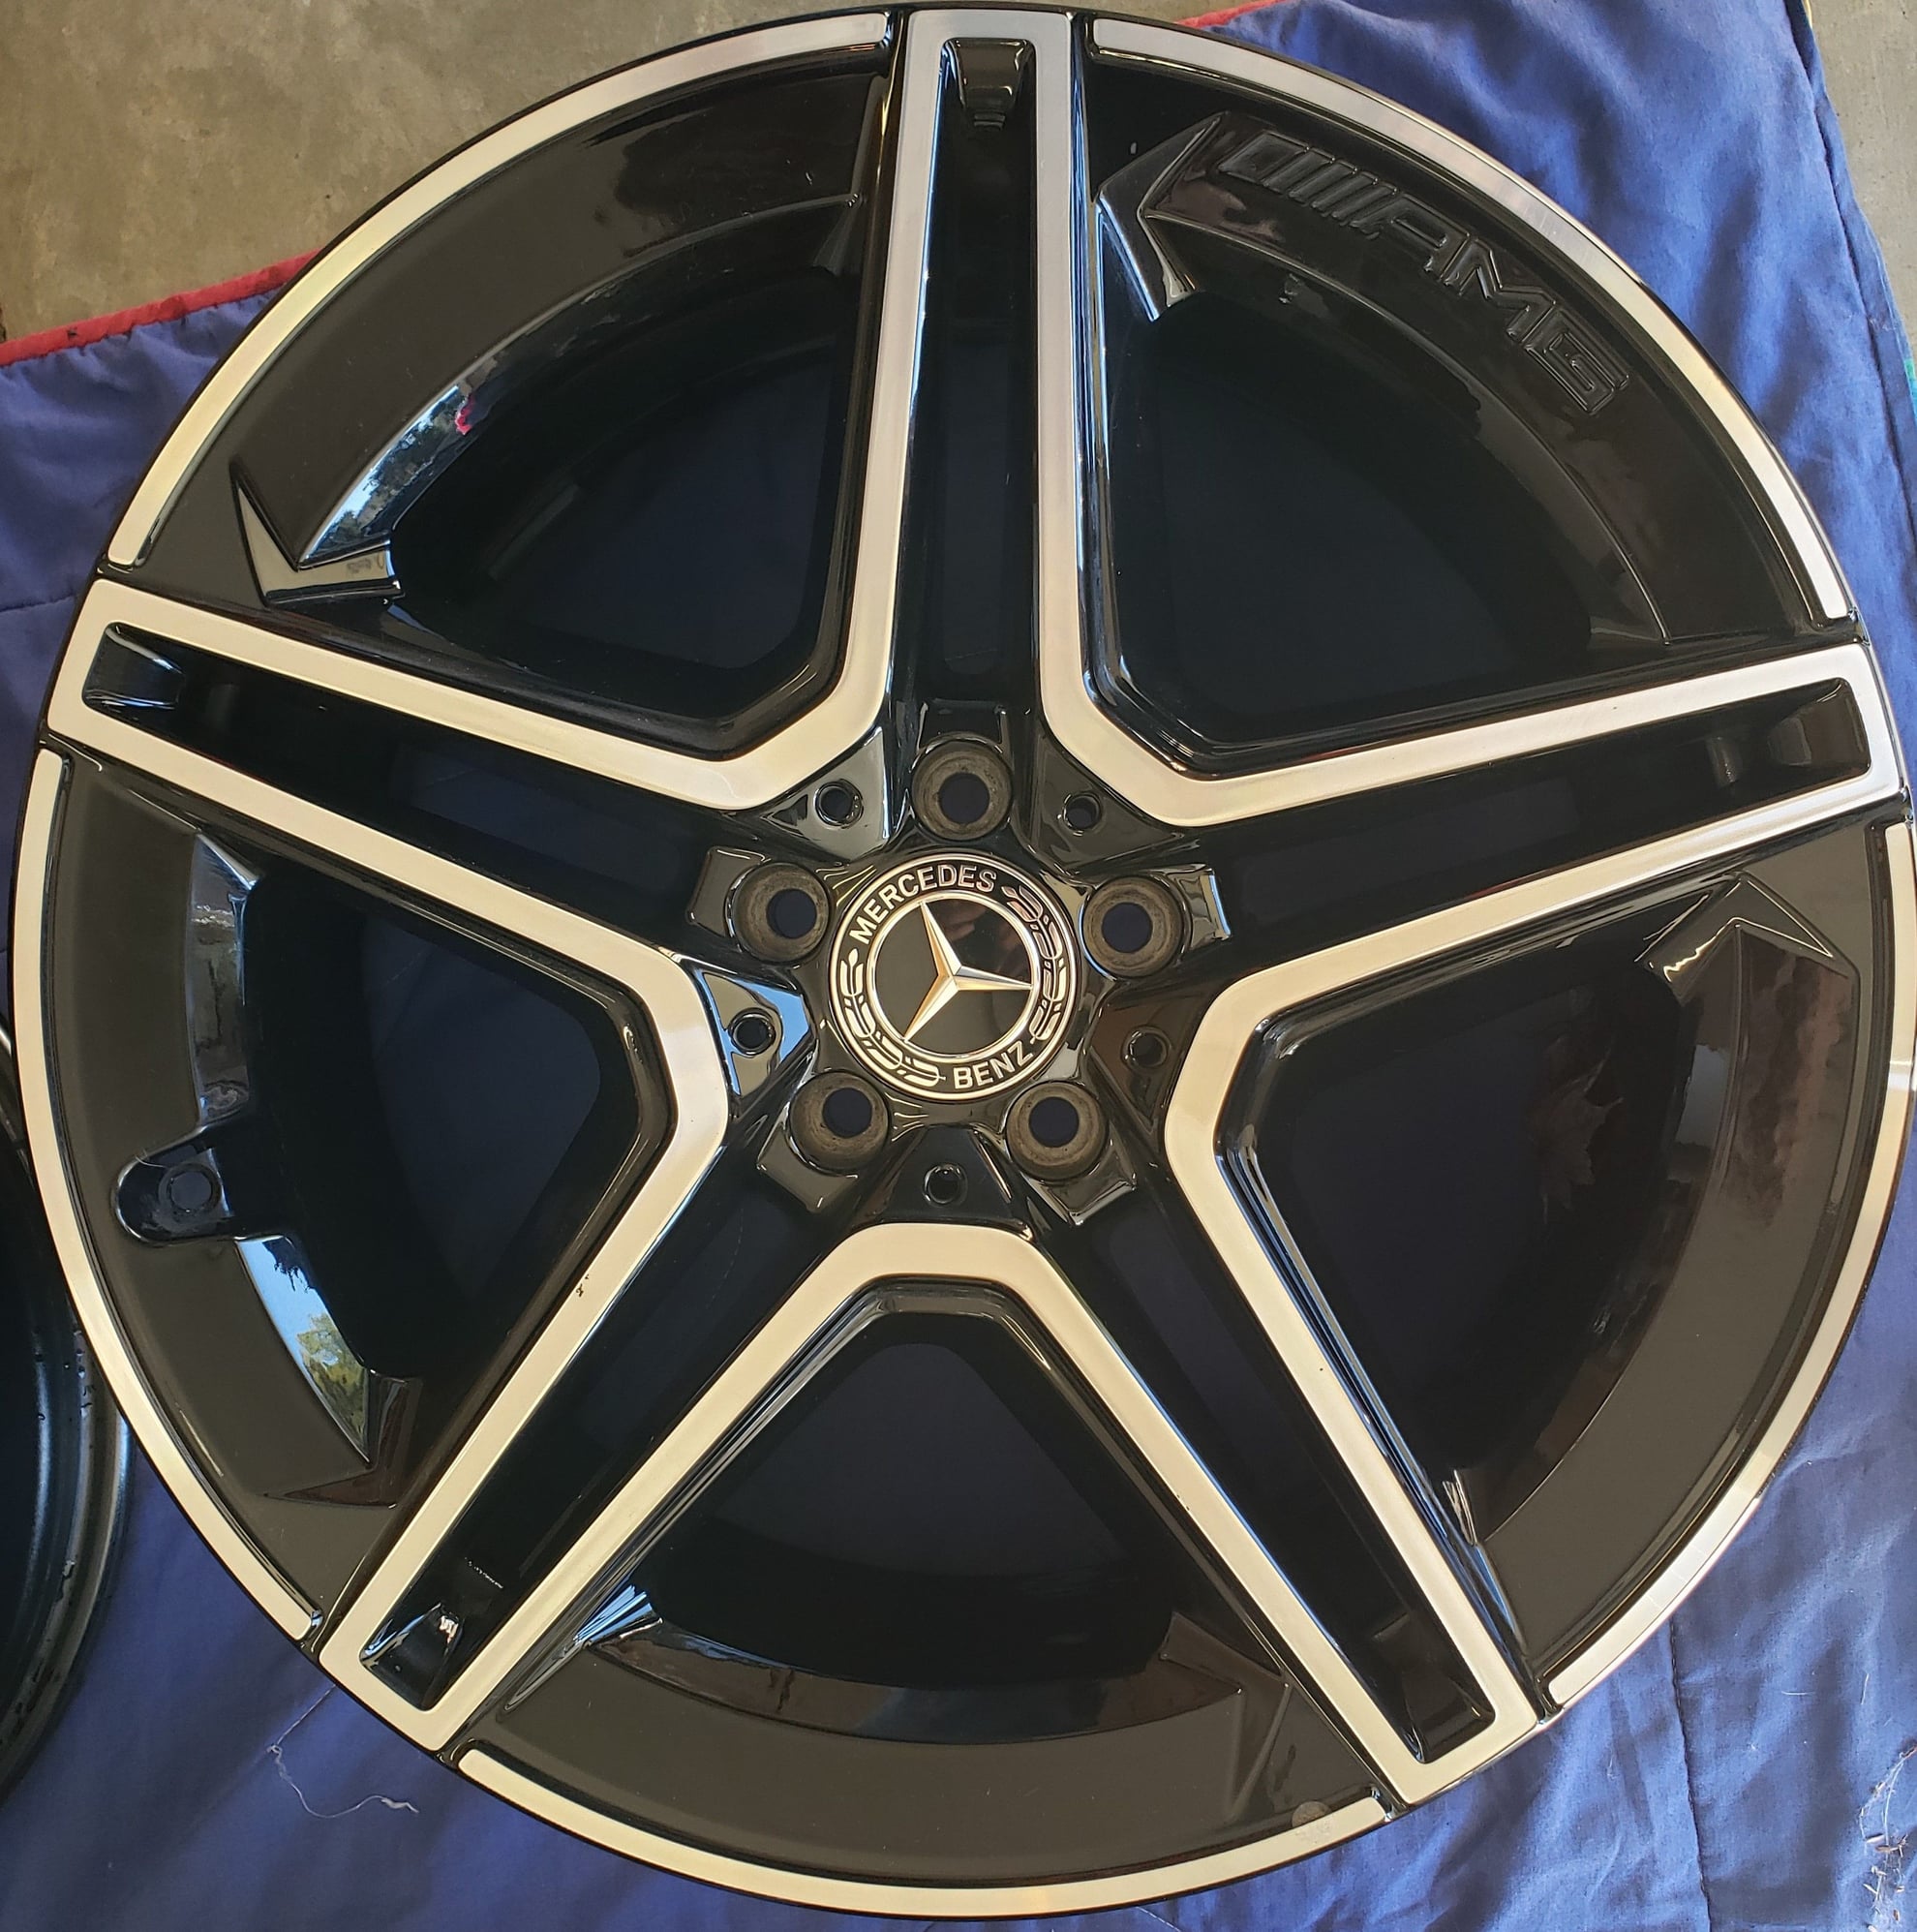 Wheels and Tires/Axles - GLE 450/350 20" Wheels/tires for Sale - Used - 2020 to 2022 Mercedes-Benz GLE450 - Benicia, CA 94510, United States